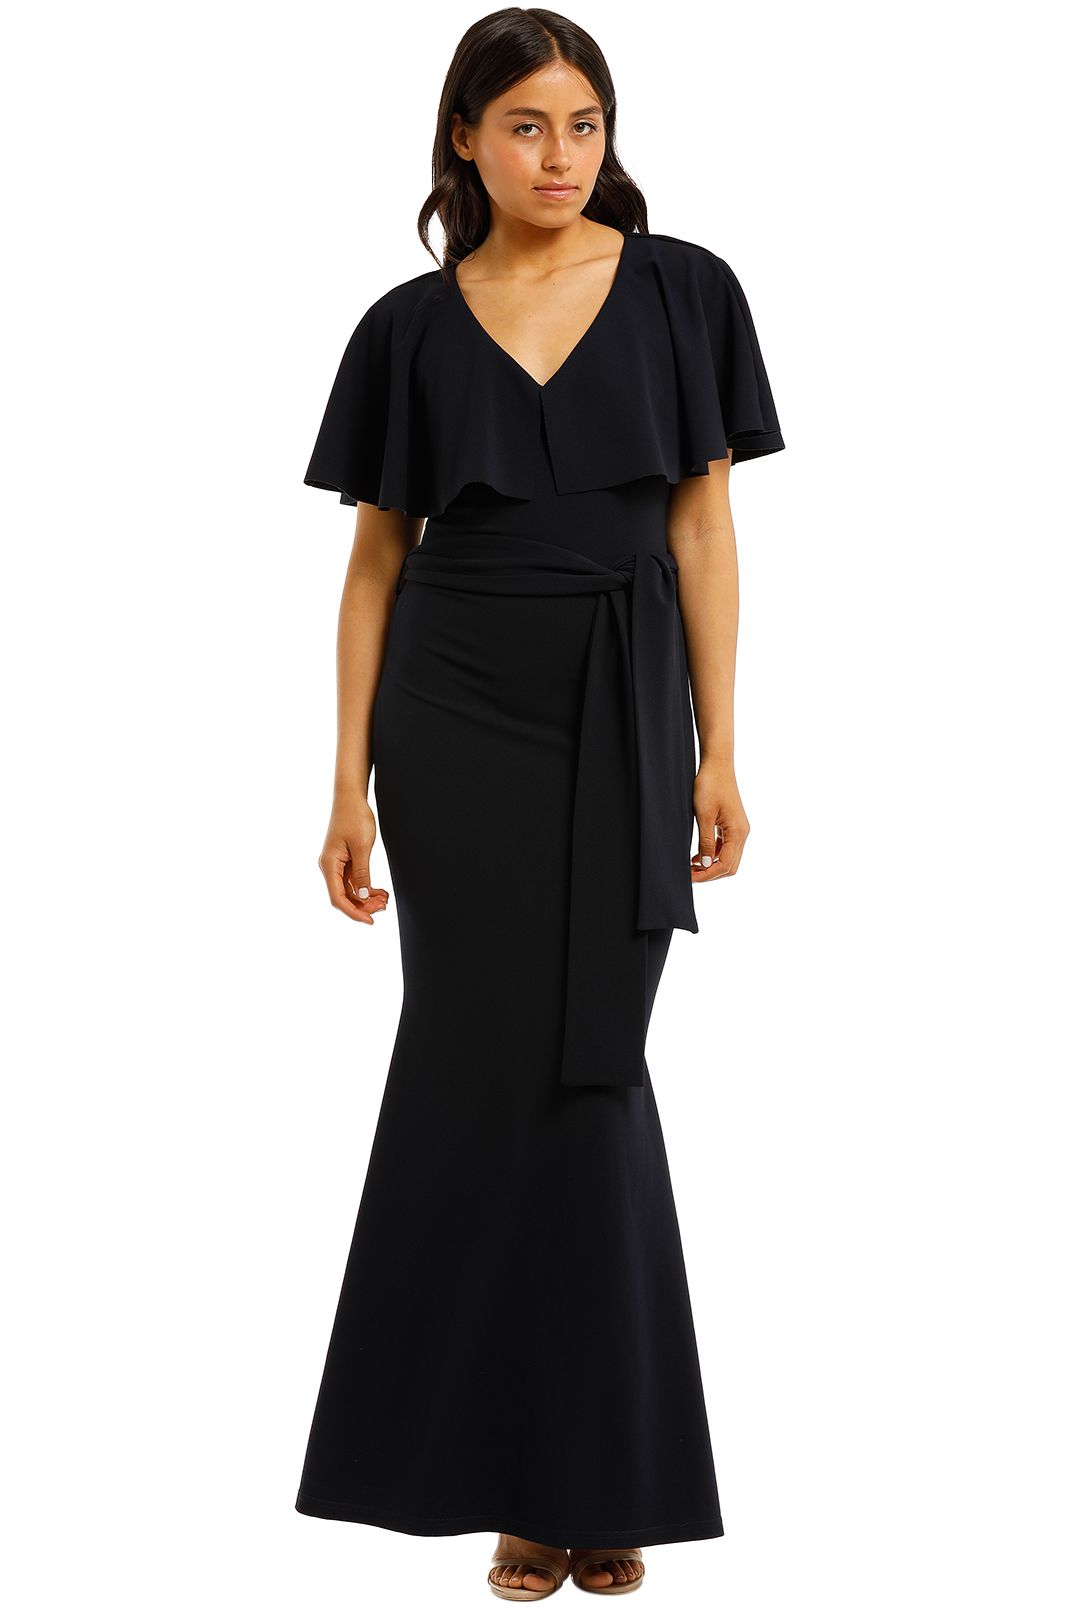 Pasduchas-Mrs-Carter-Gown-Navy-Front